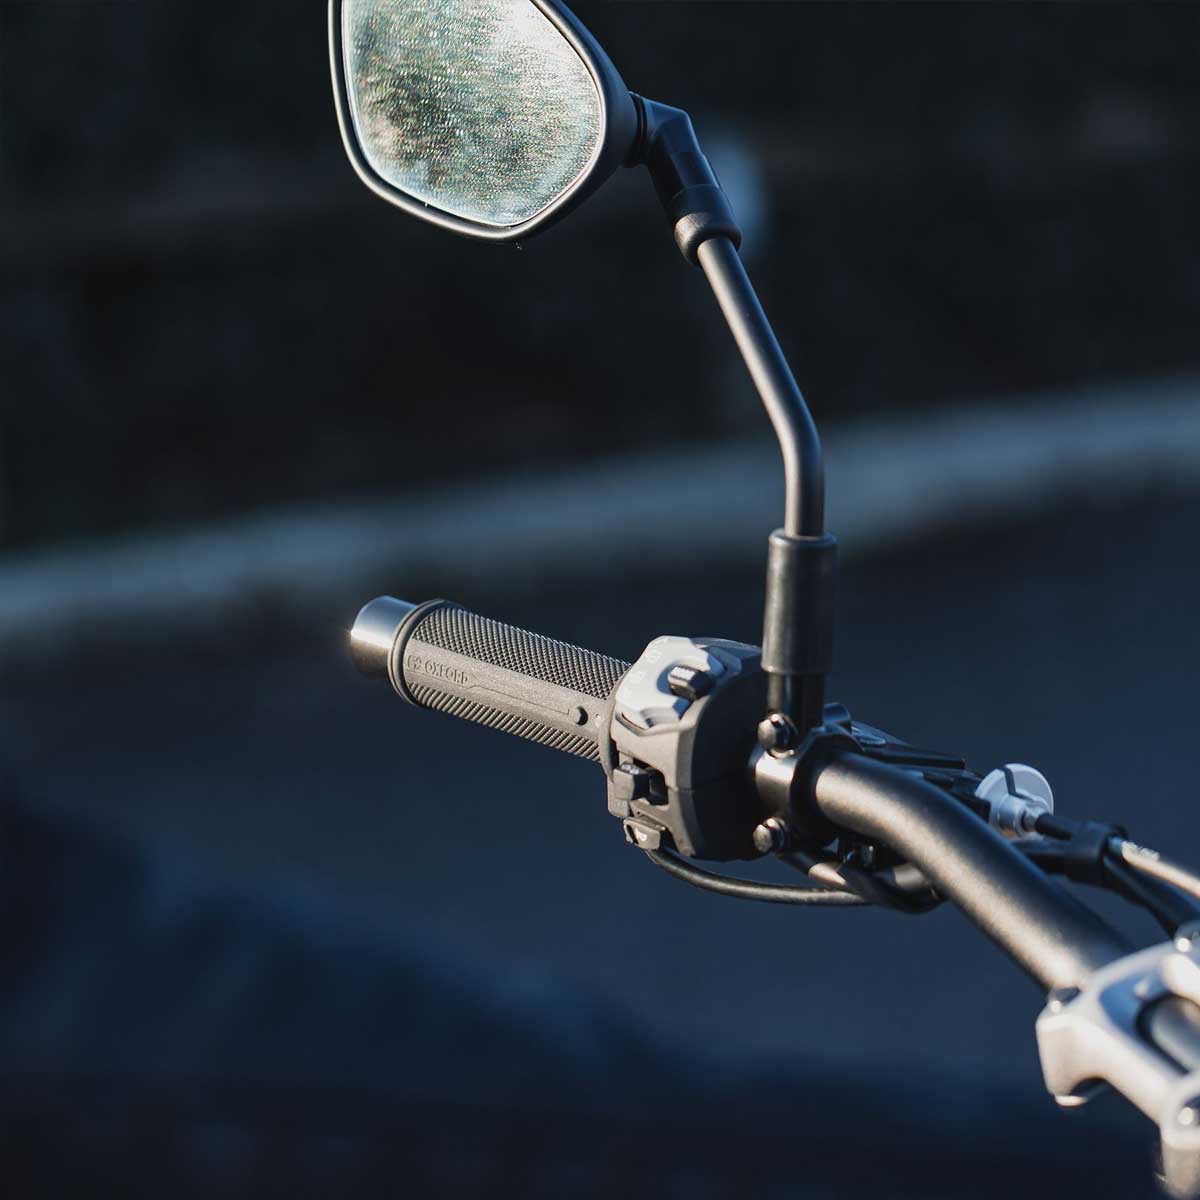 Upgrade your comfort with Oxford's HotGrips PRO: Heated grips with a cleaner look & a longer life